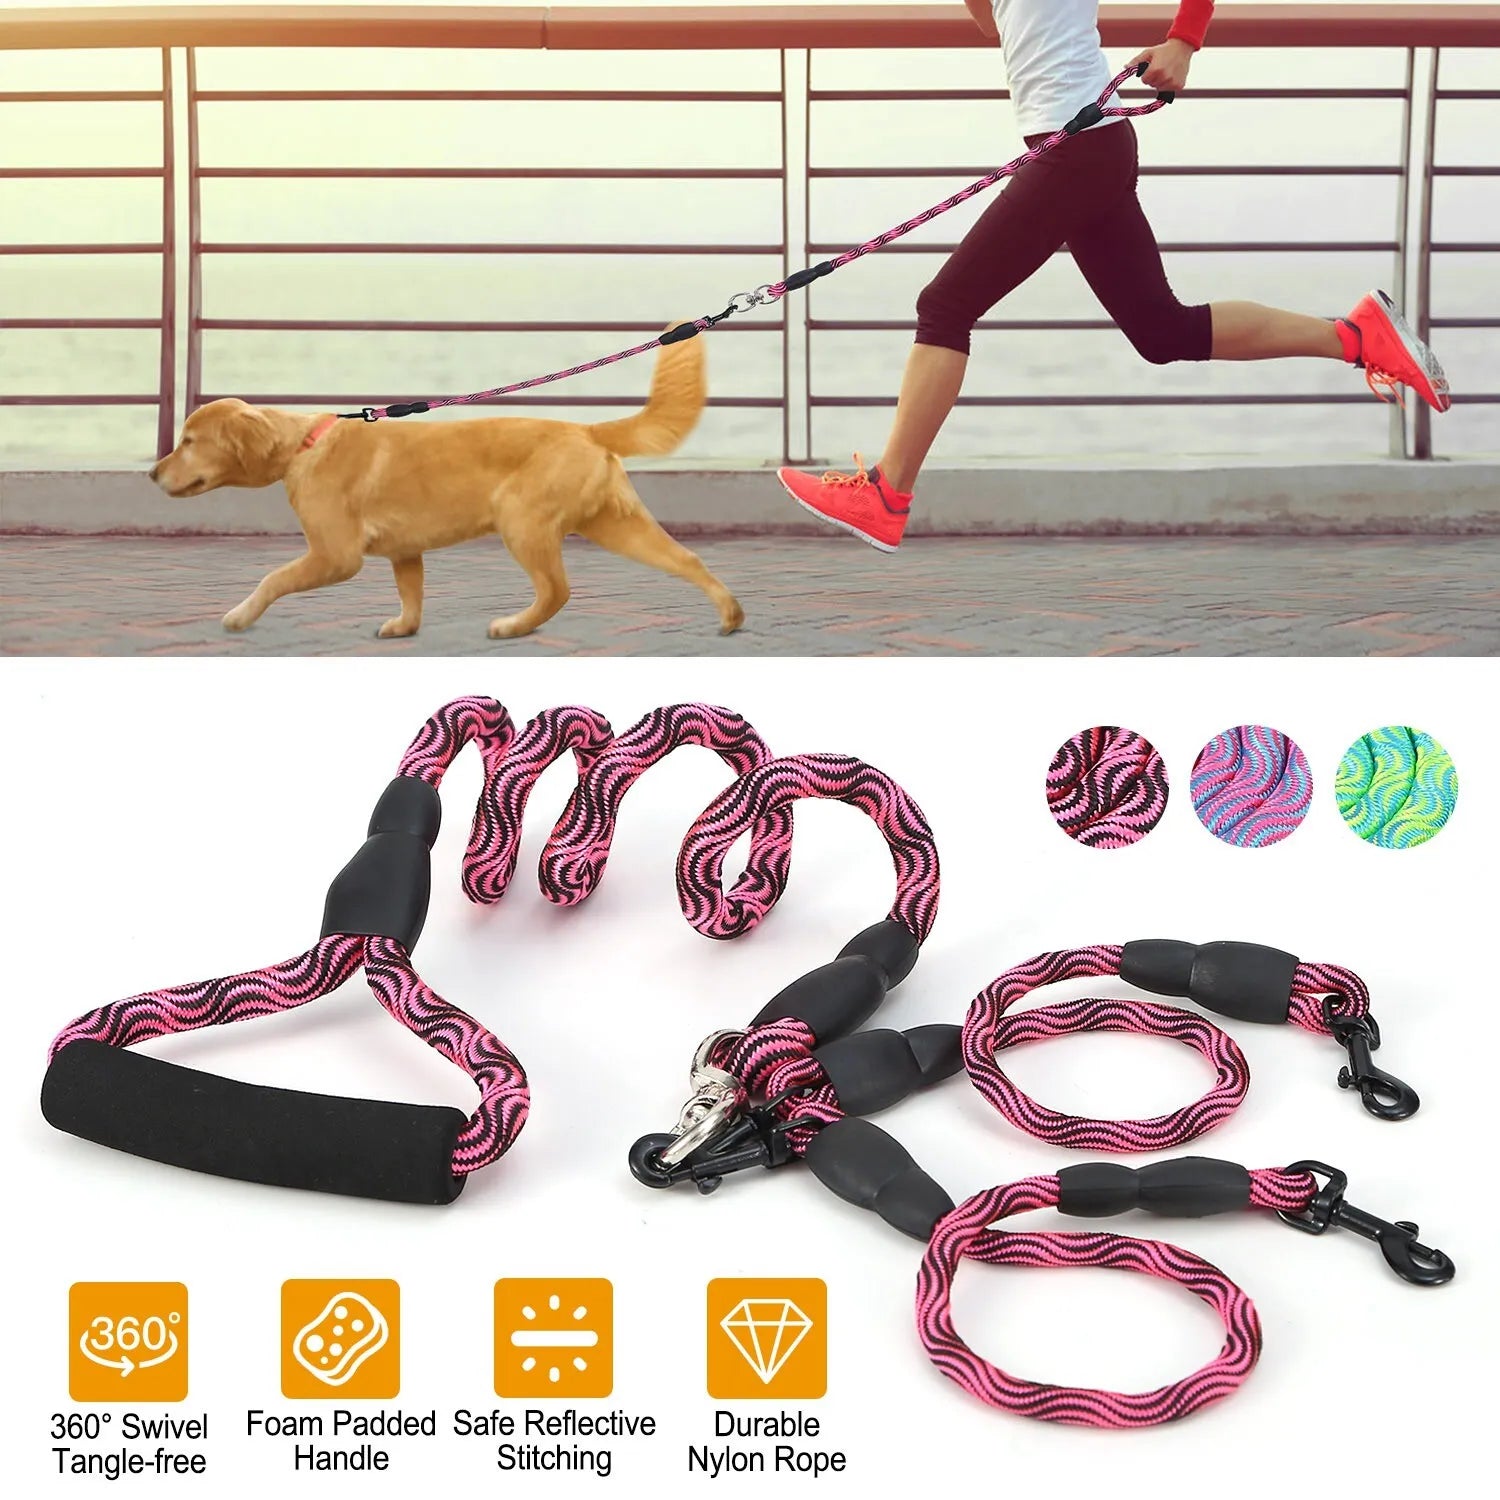 Dual Double Dog Leash: Walk Two Dogs Tangle-Free with Ease!